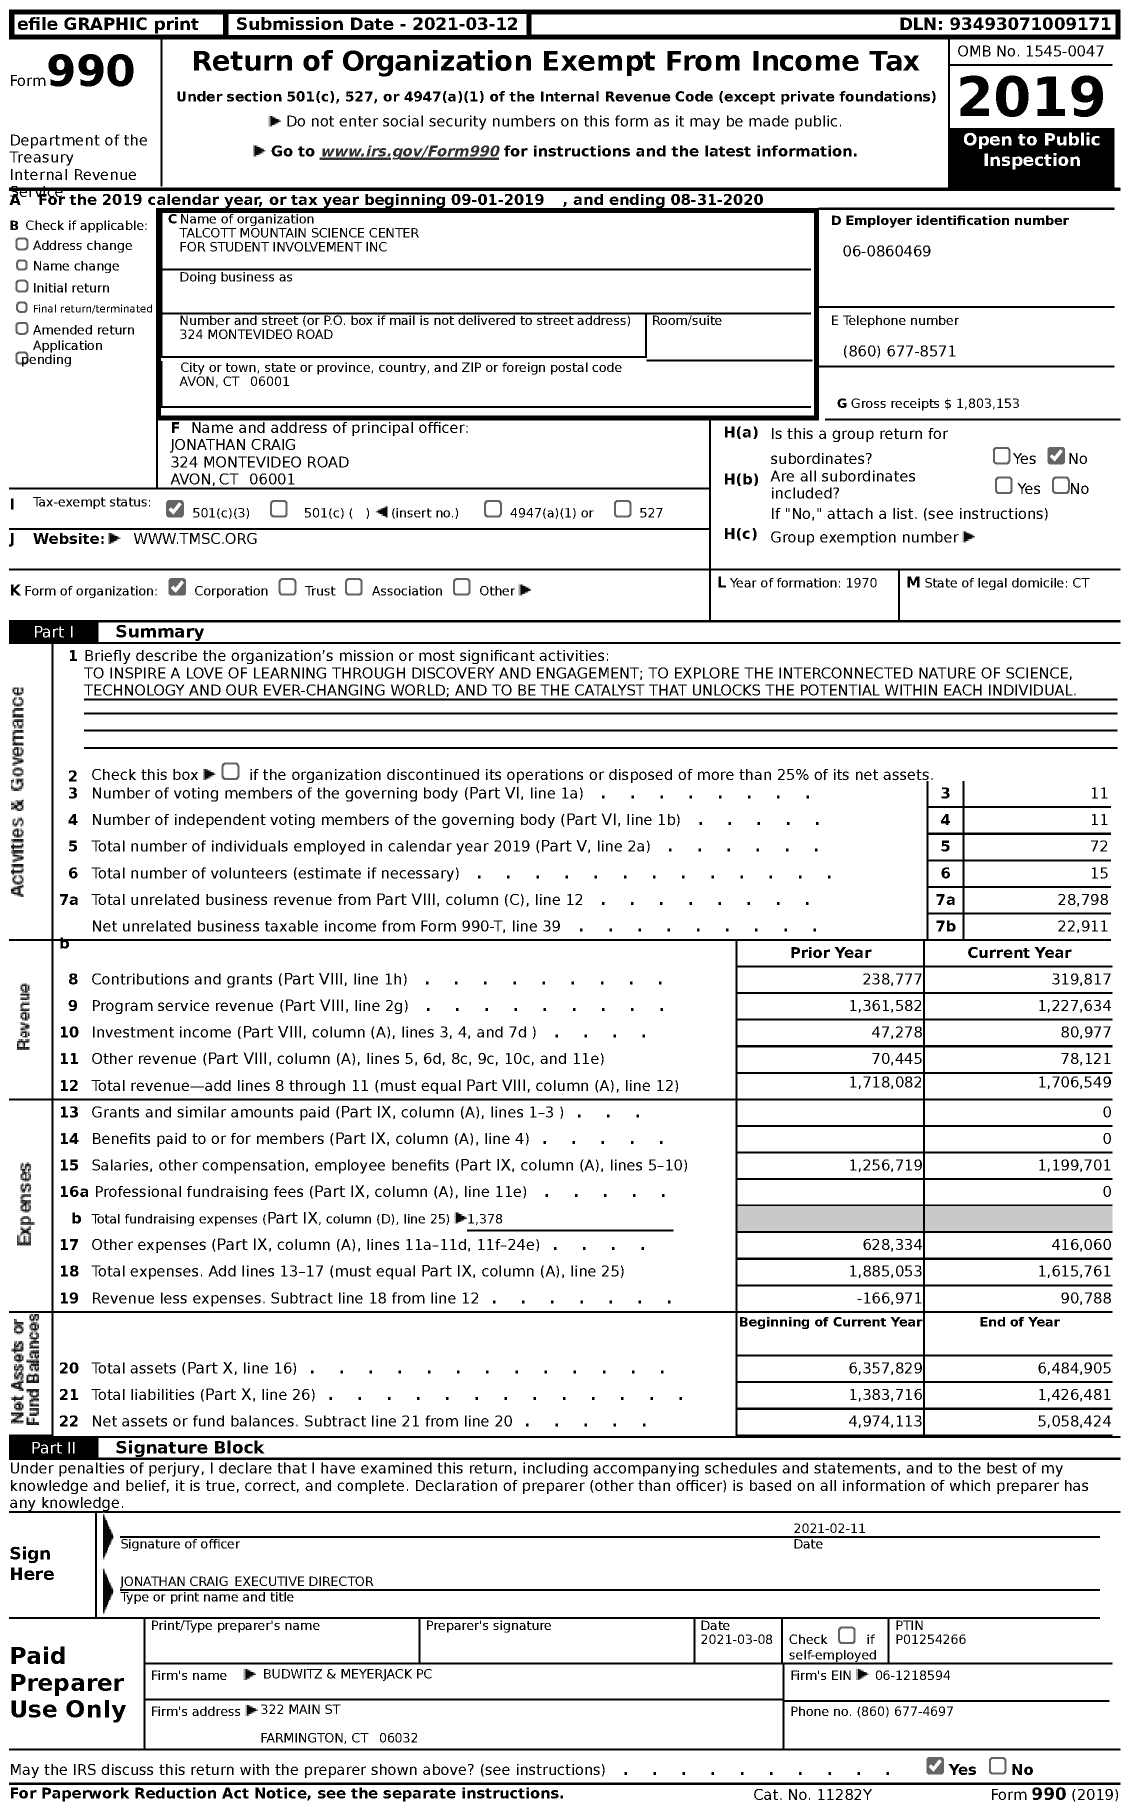 Image of first page of 2019 Form 990 for Talcott Mountain Science Center for Student Involvement